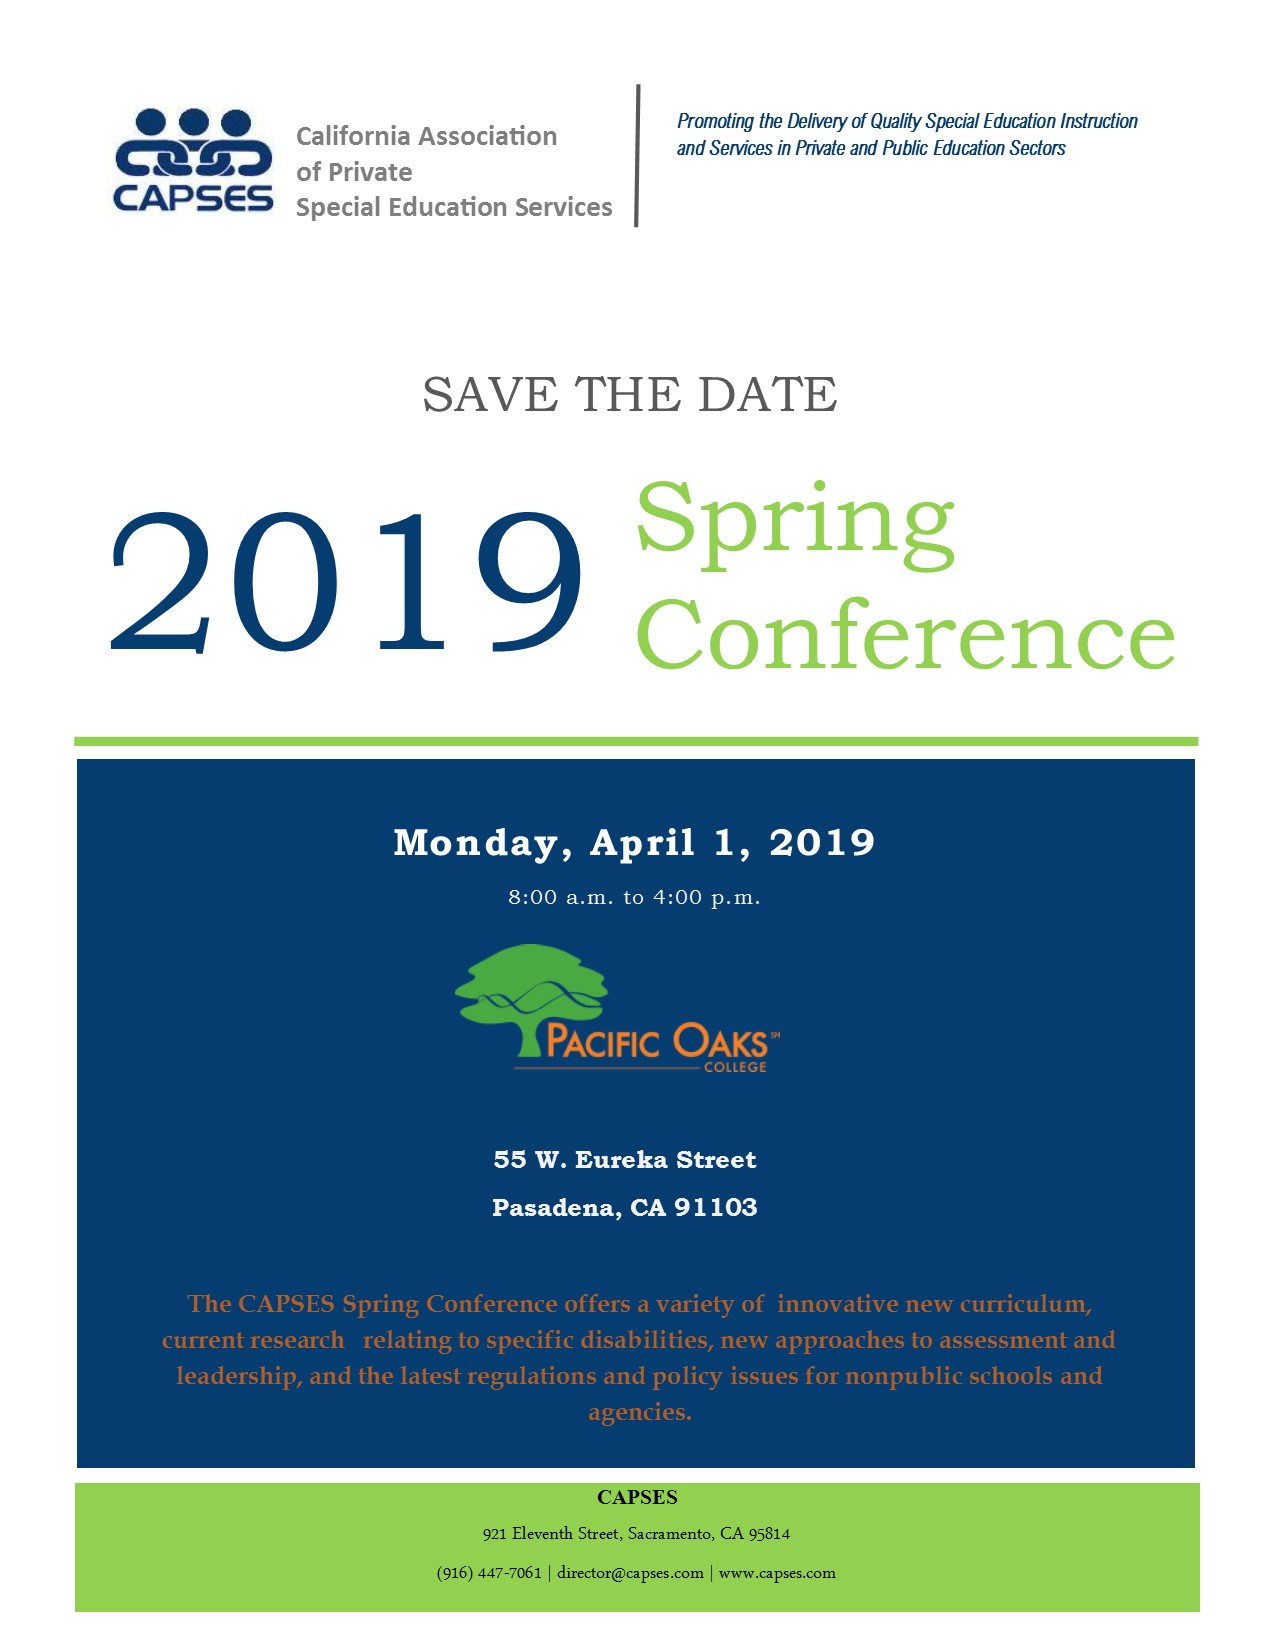 save-the-date-spring-conference.jpg